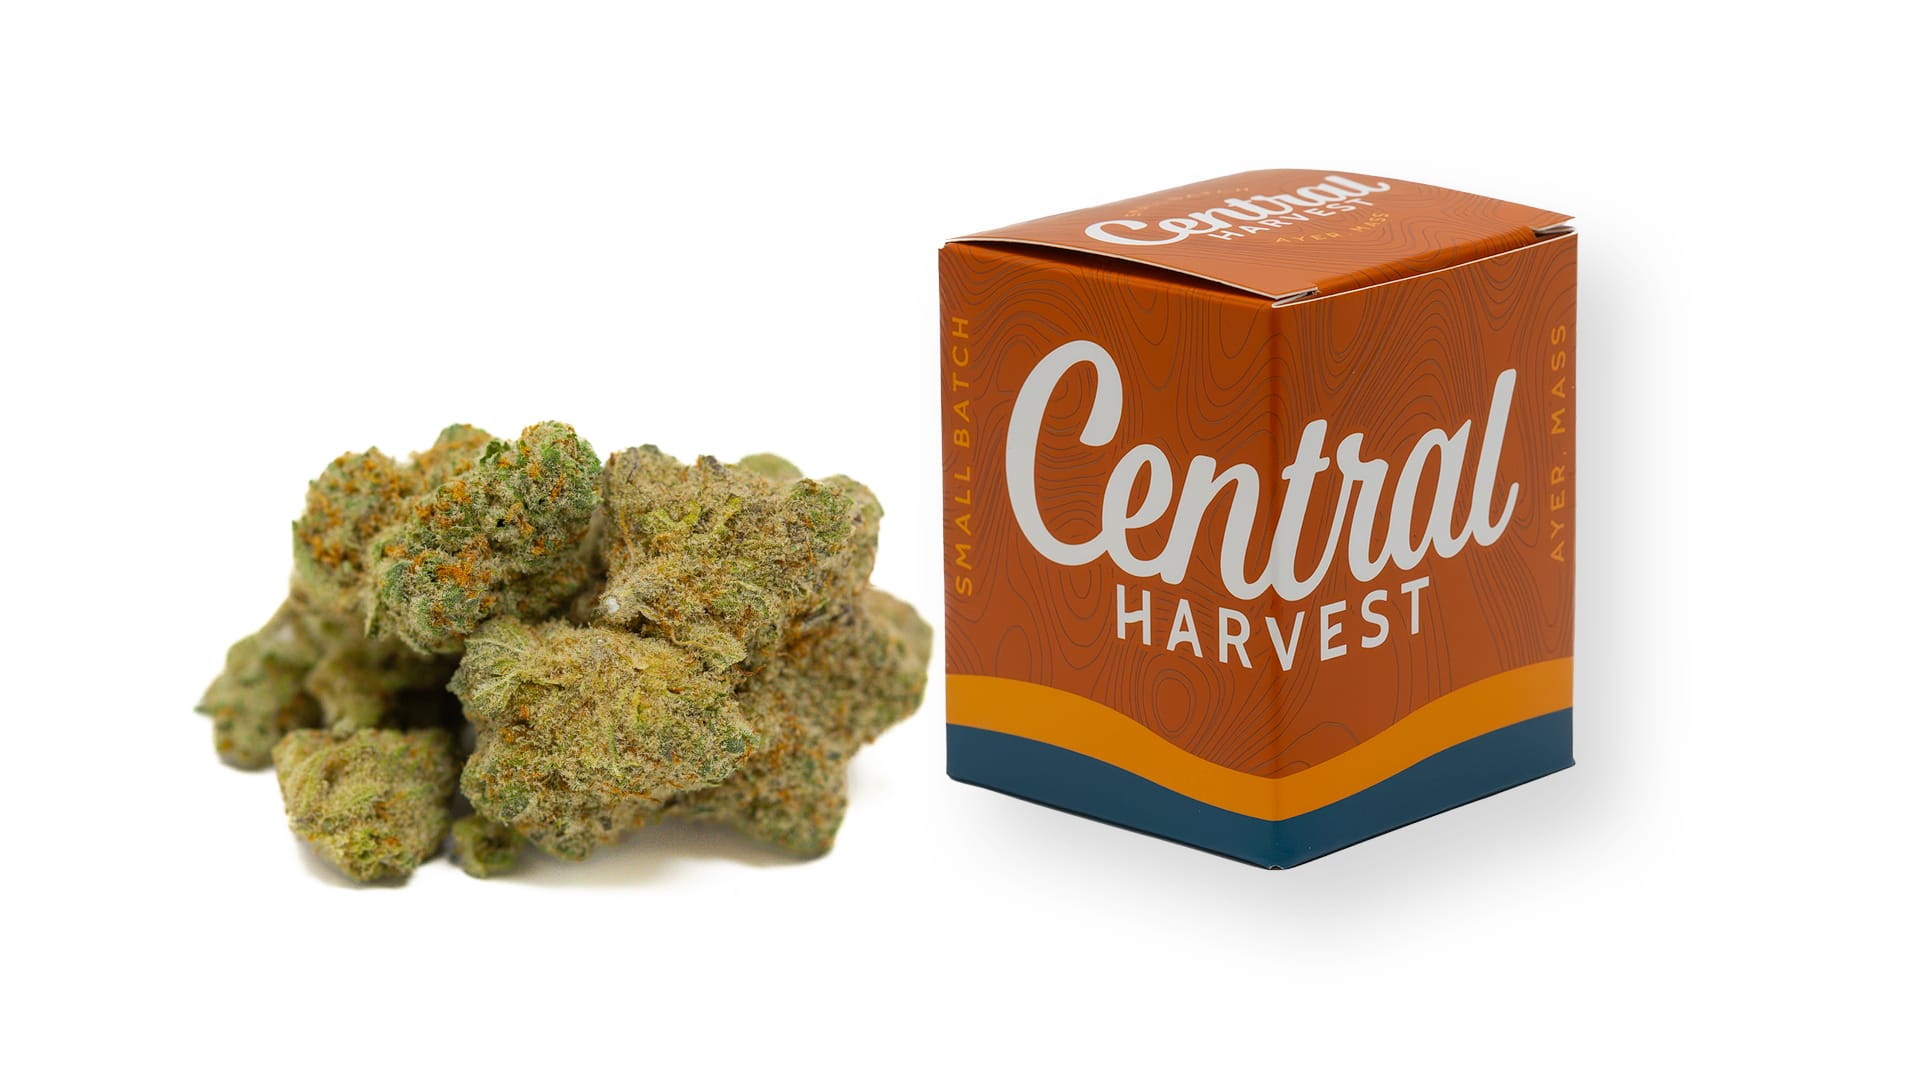 Mike's Strawberry Lemonade is a Hybrid Cannabis Strain Grown & Packaged at Central Harvest